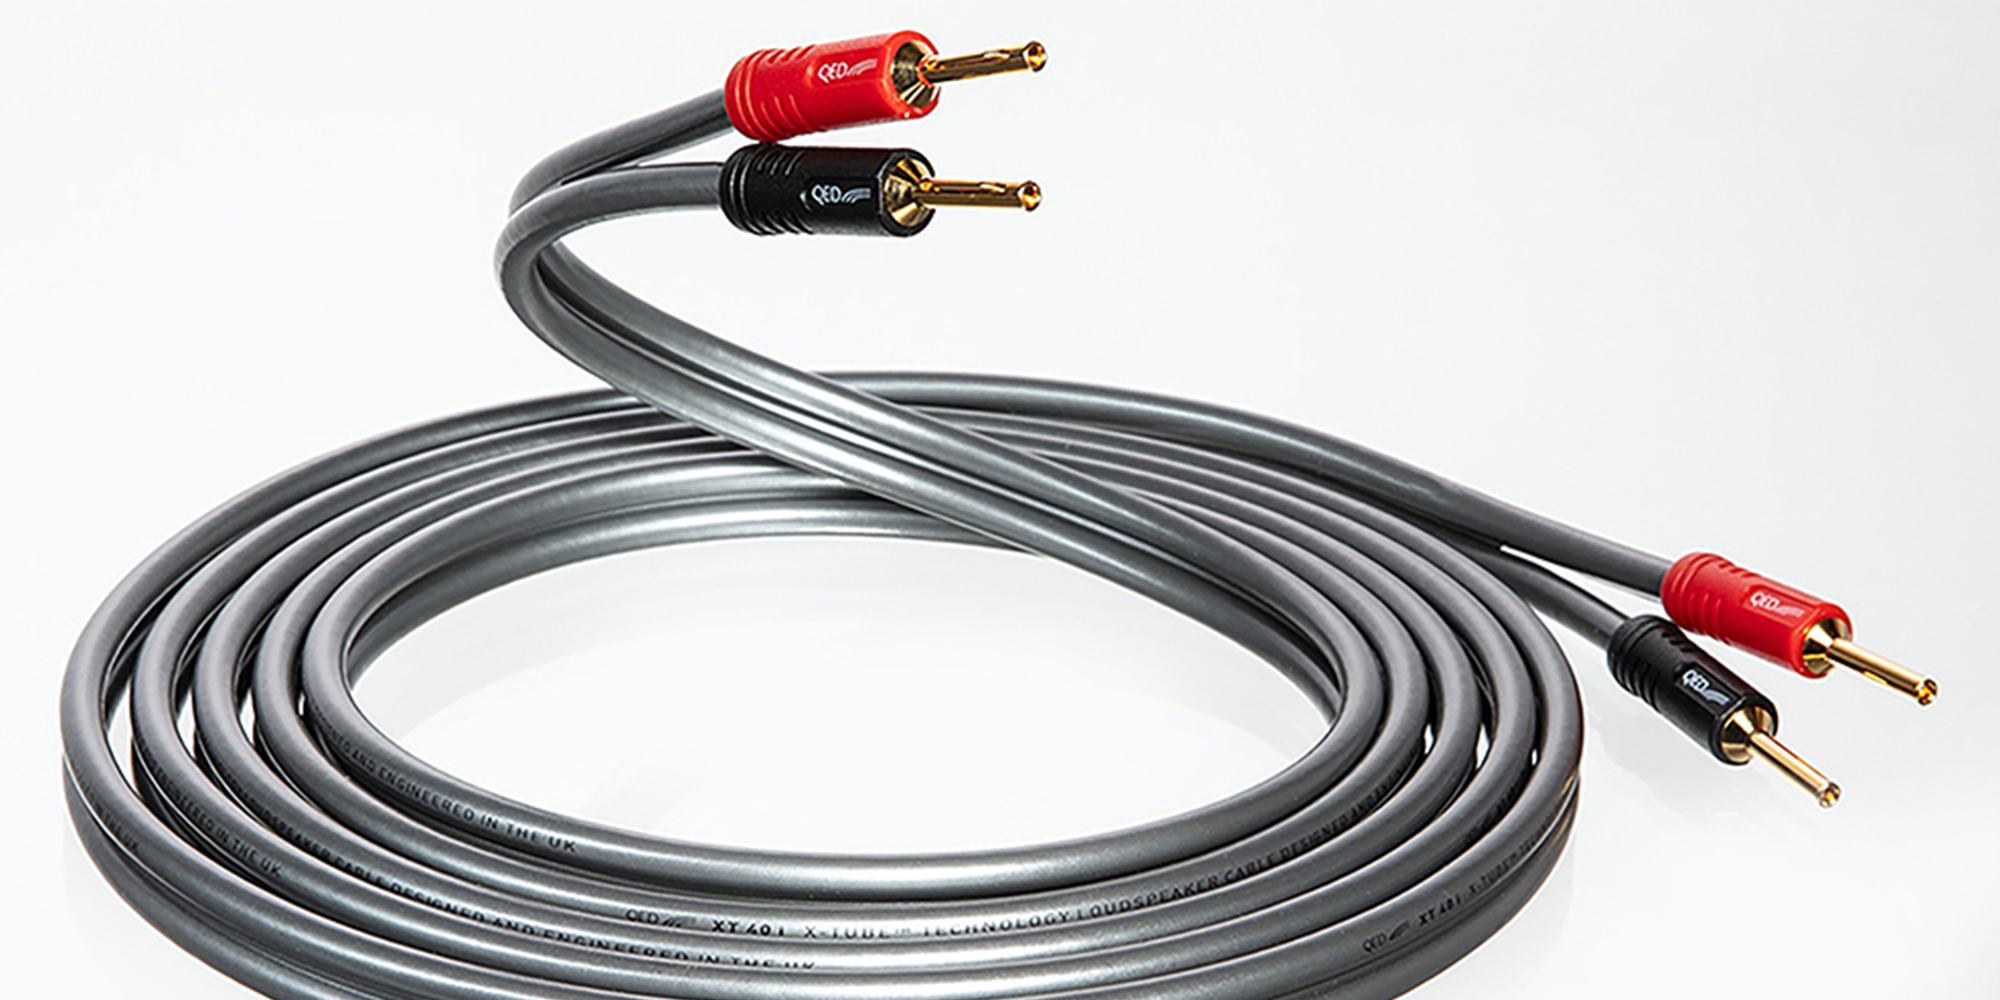 A guide to audio cables